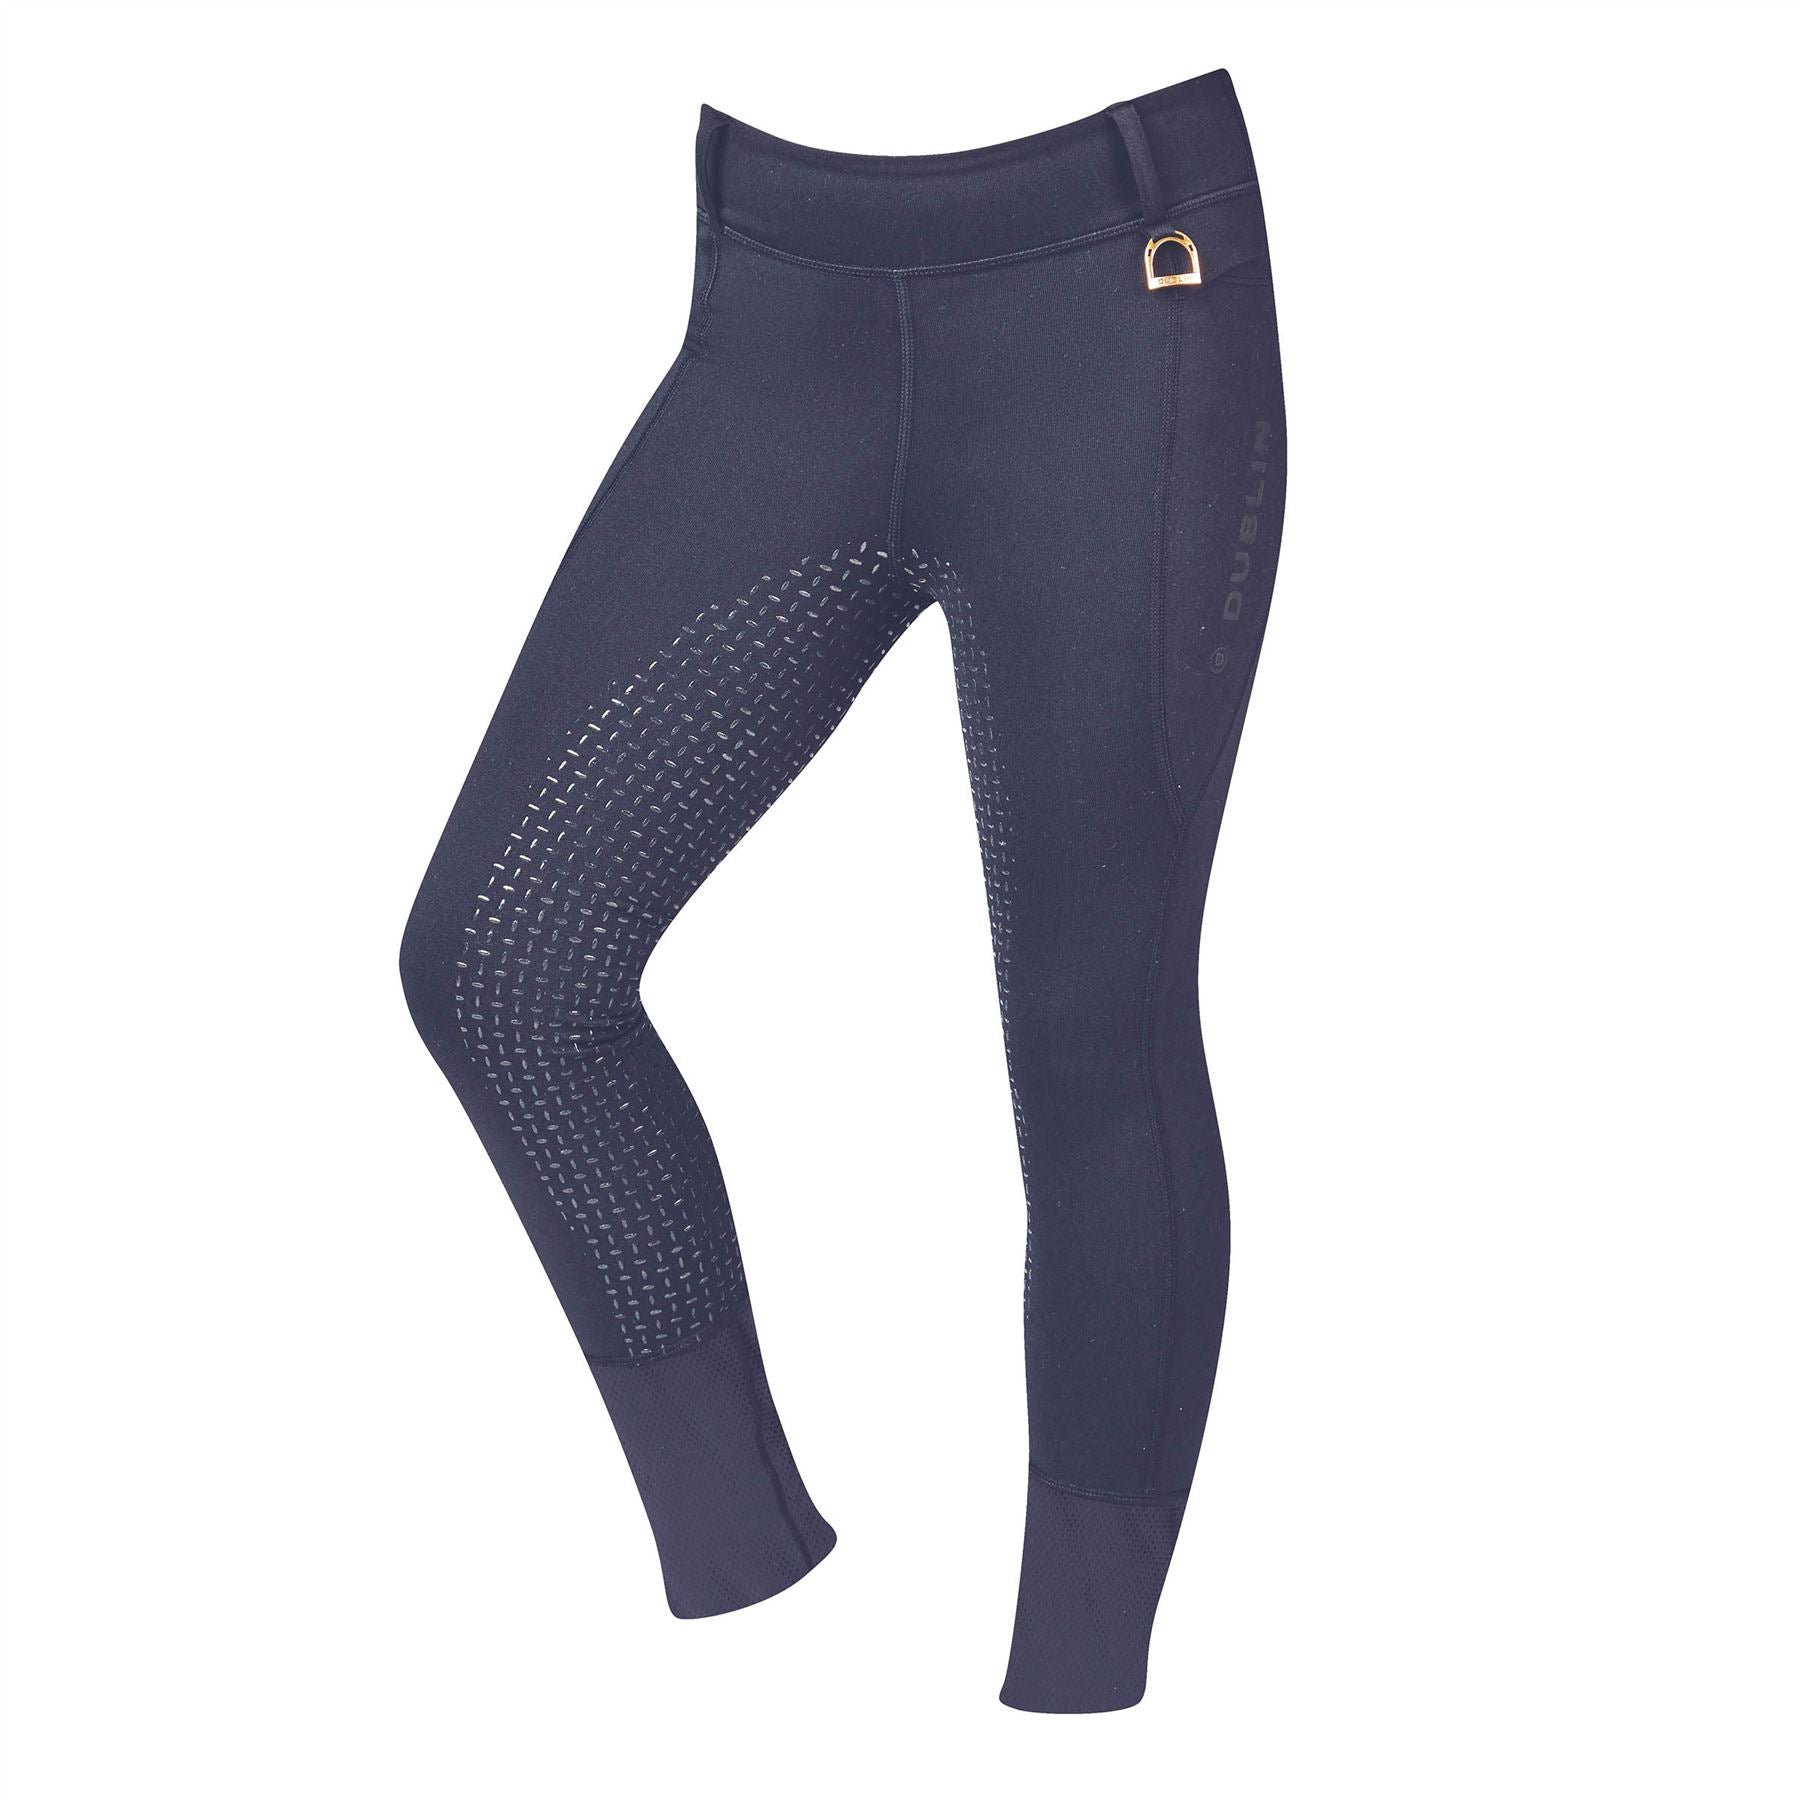 Dublin Cool It Everyday Riding Tights - Just Horse Riders